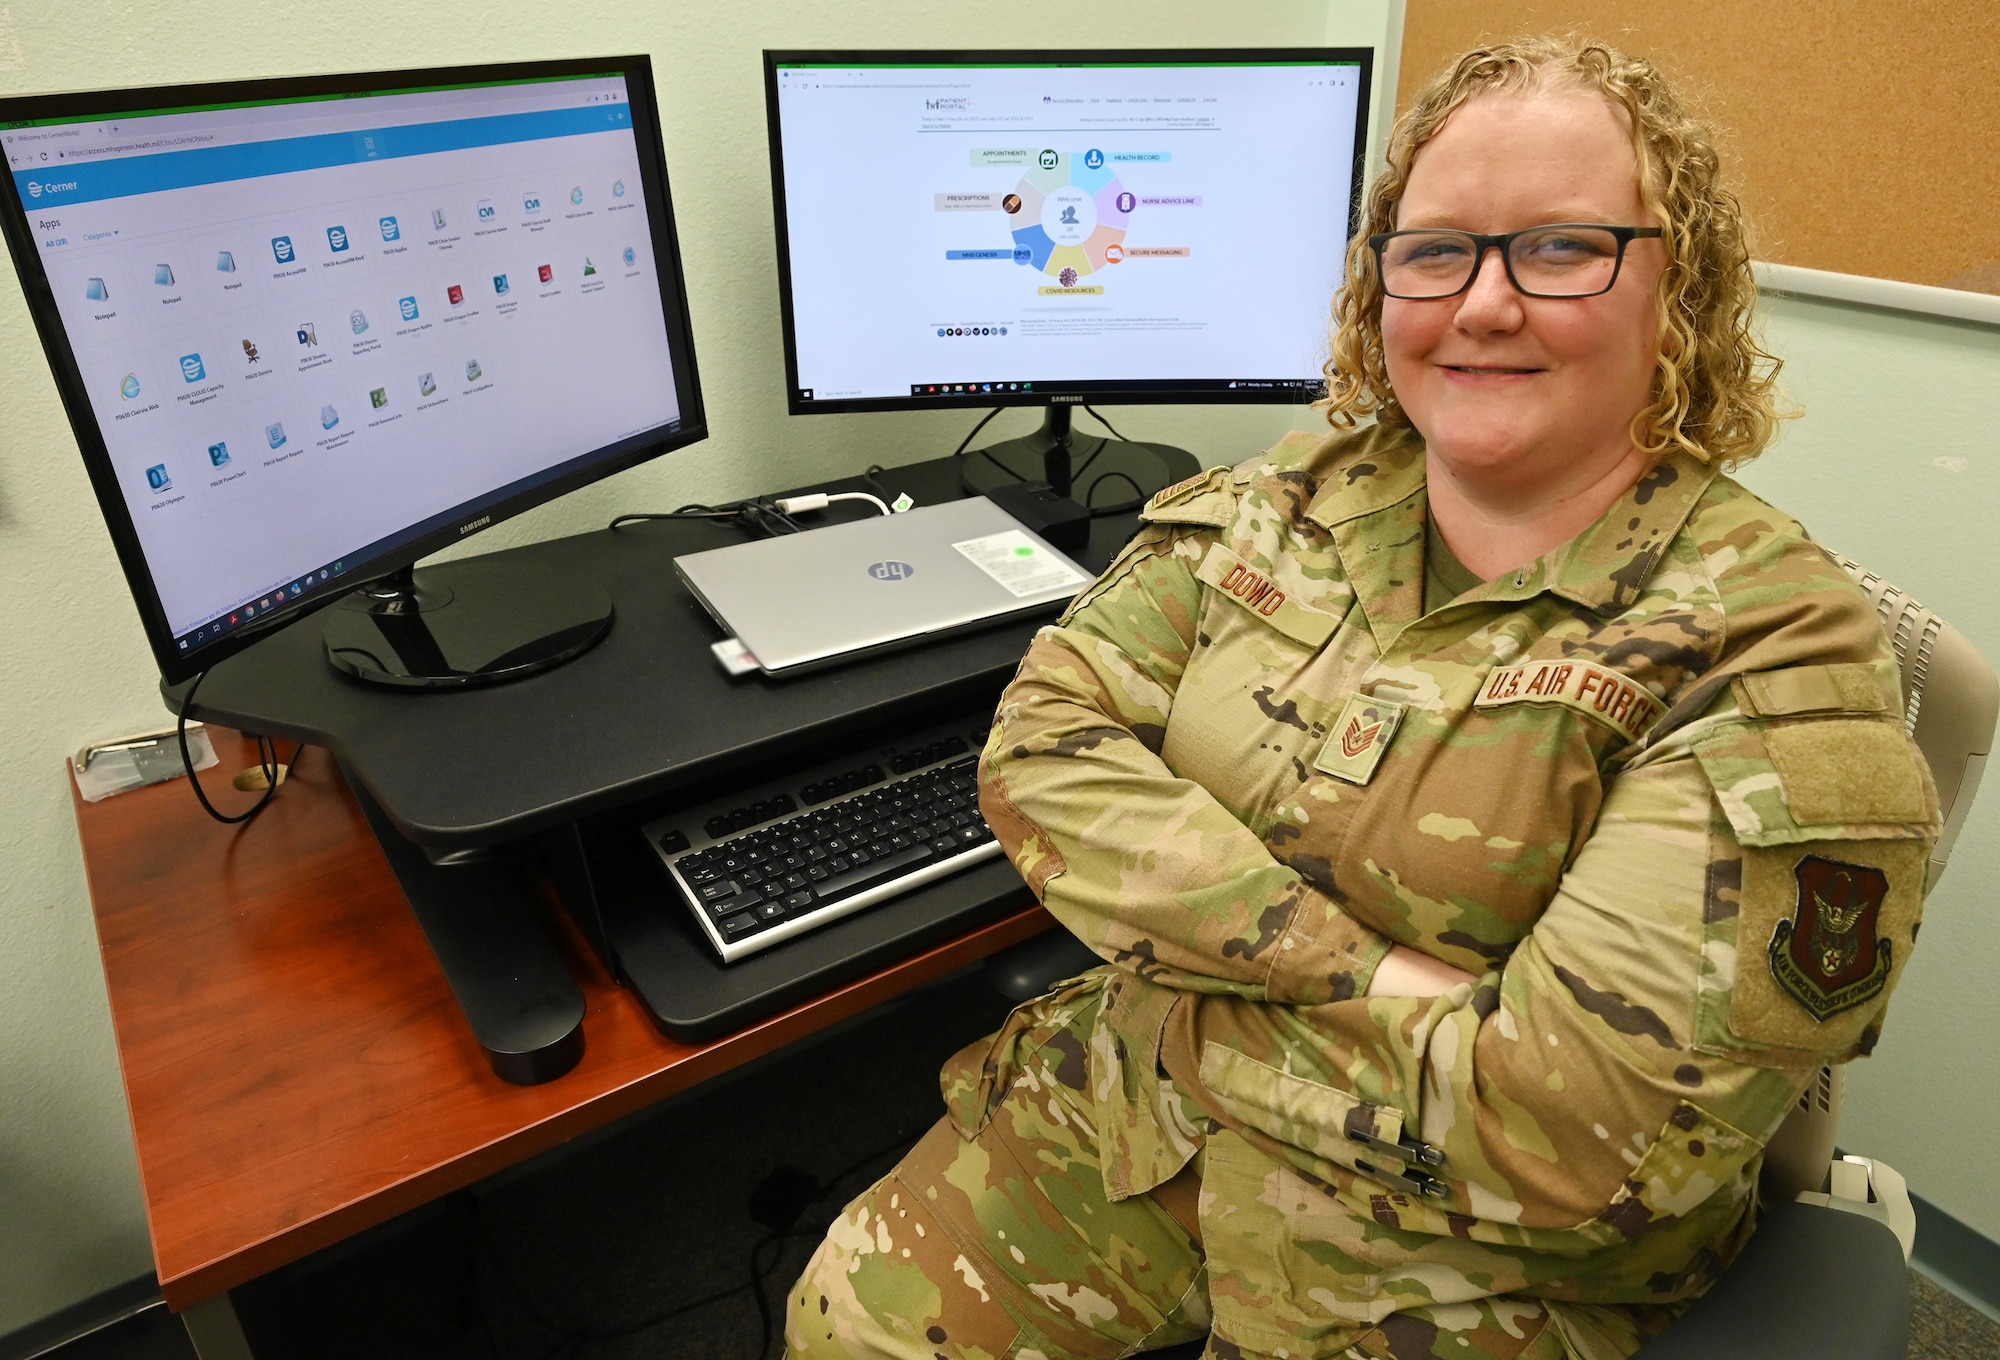 An Airman with arms crossed and seated in an office chair smiles at the viewer, computer monitors behind her display the new electronic health system she implemented.